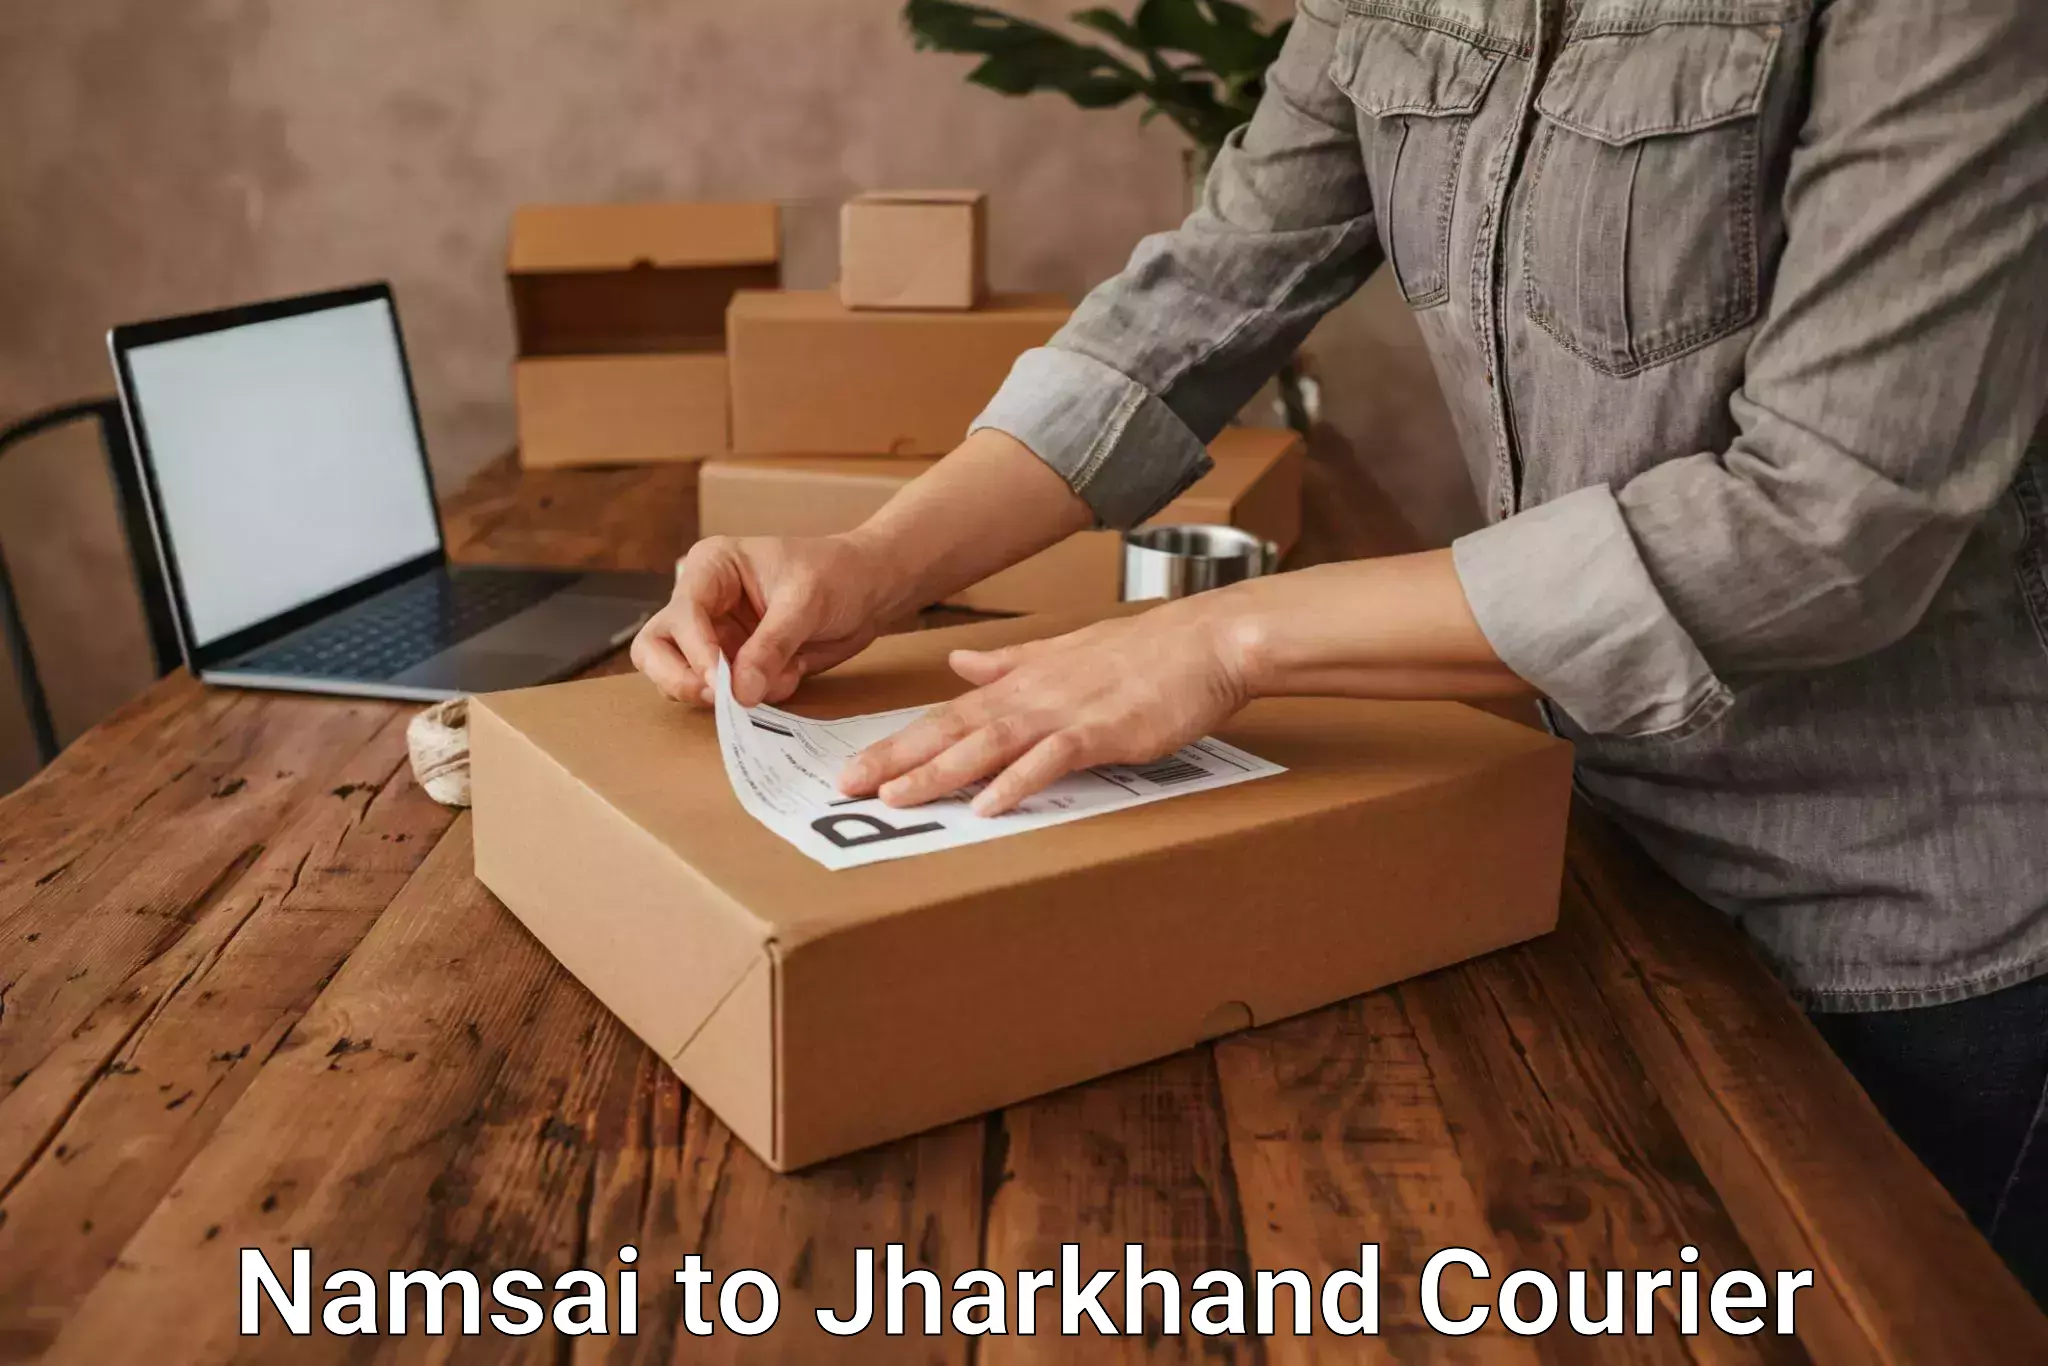 Subscription-based courier Namsai to Ranchi